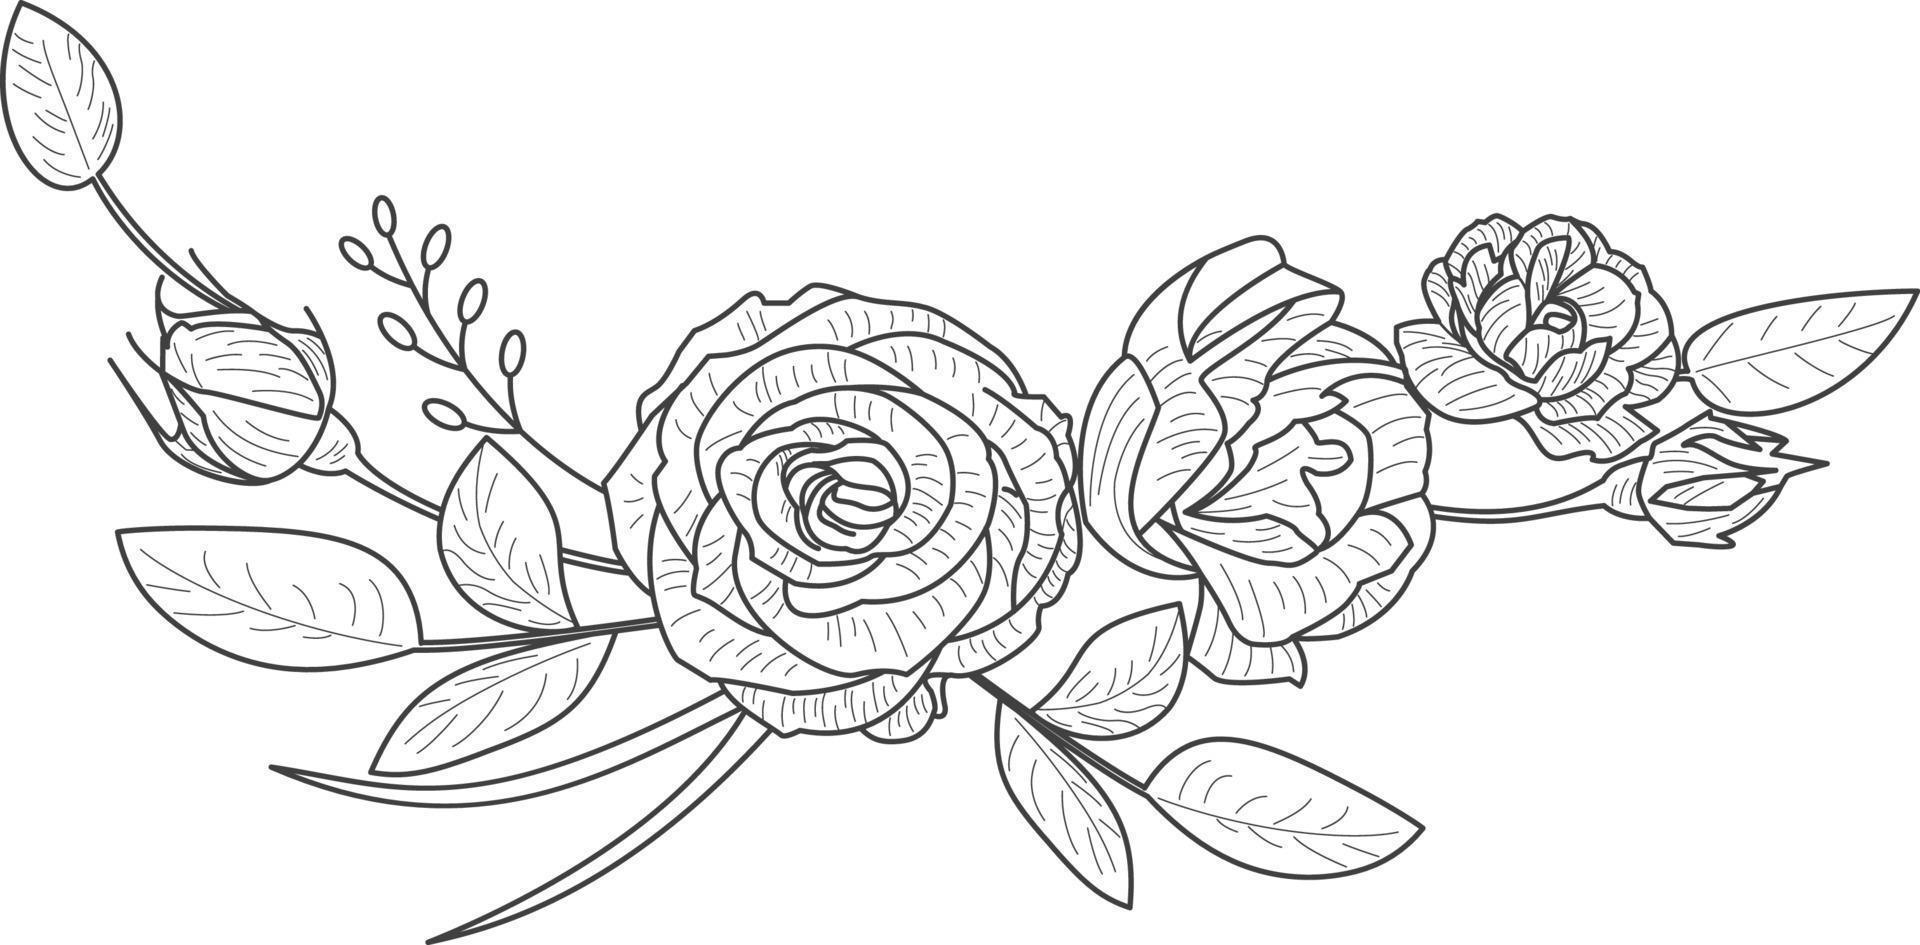 Hand drawn detailed isolated flowers rose and leaves set in vintage style. It can be used for engraving, foil. vector